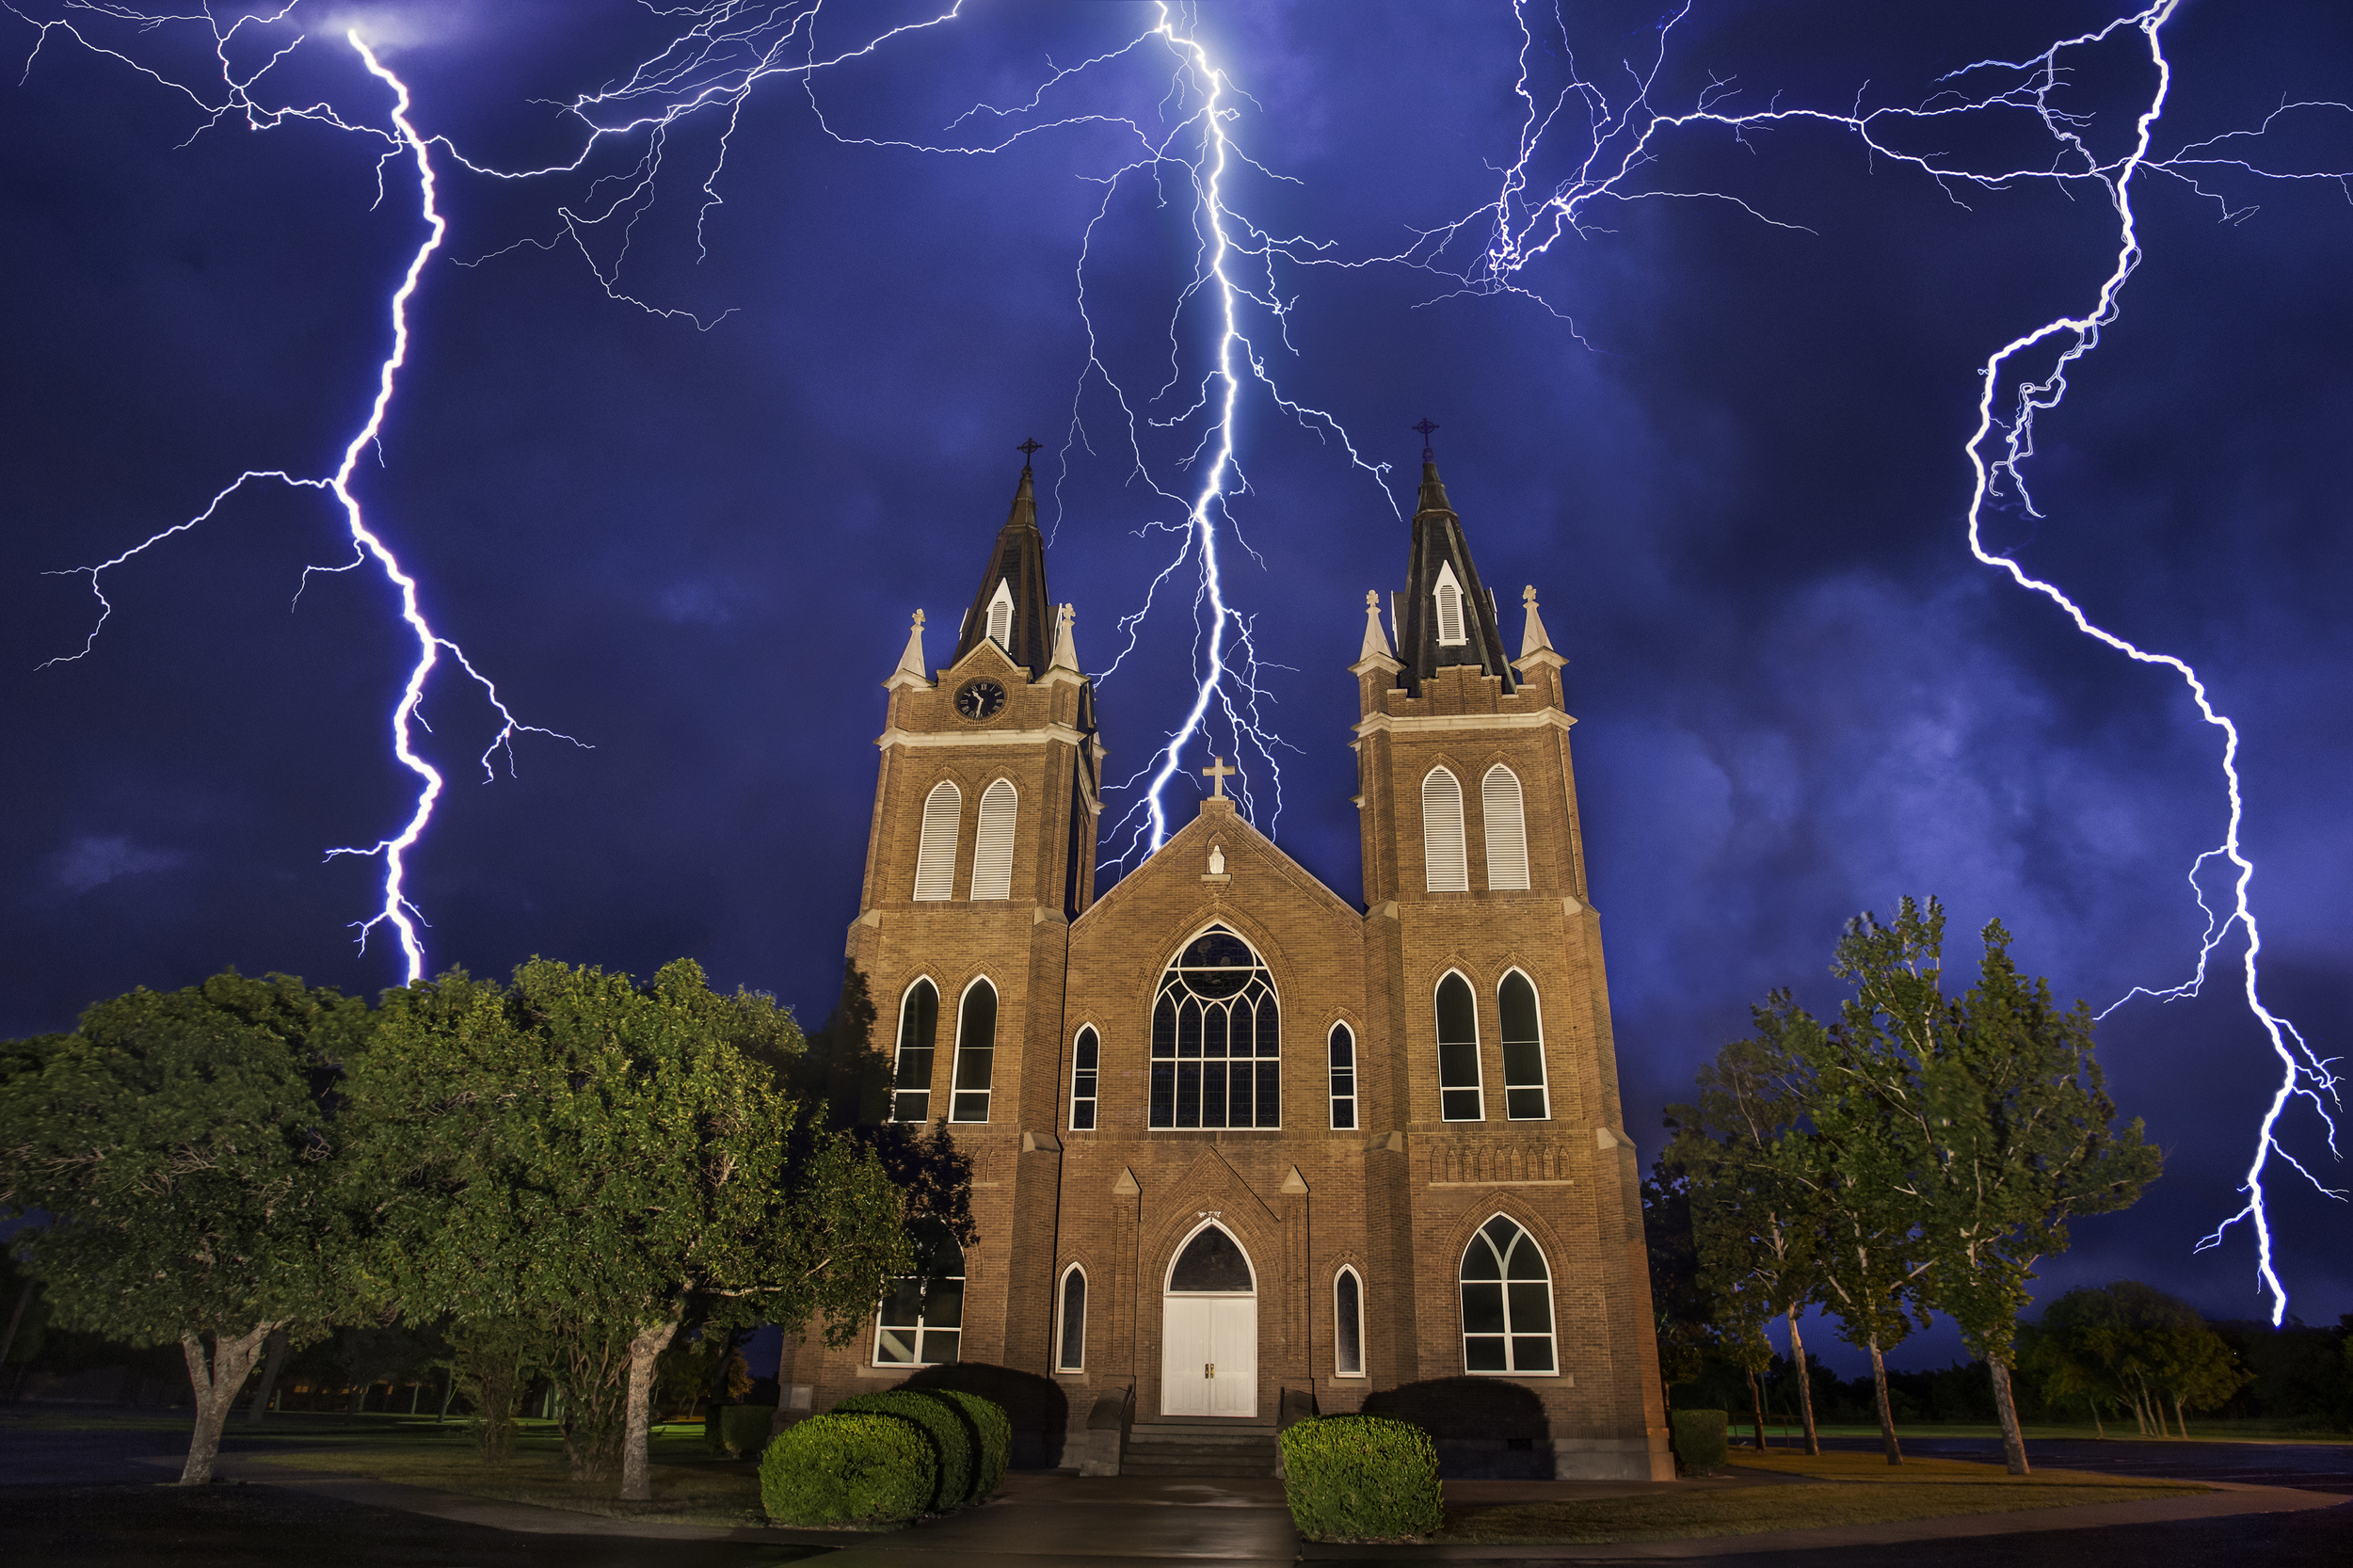  Lightning behind the Holy Trinity Church in Schwertner, Texas Stacked image of 4 photos.&nbsp; 